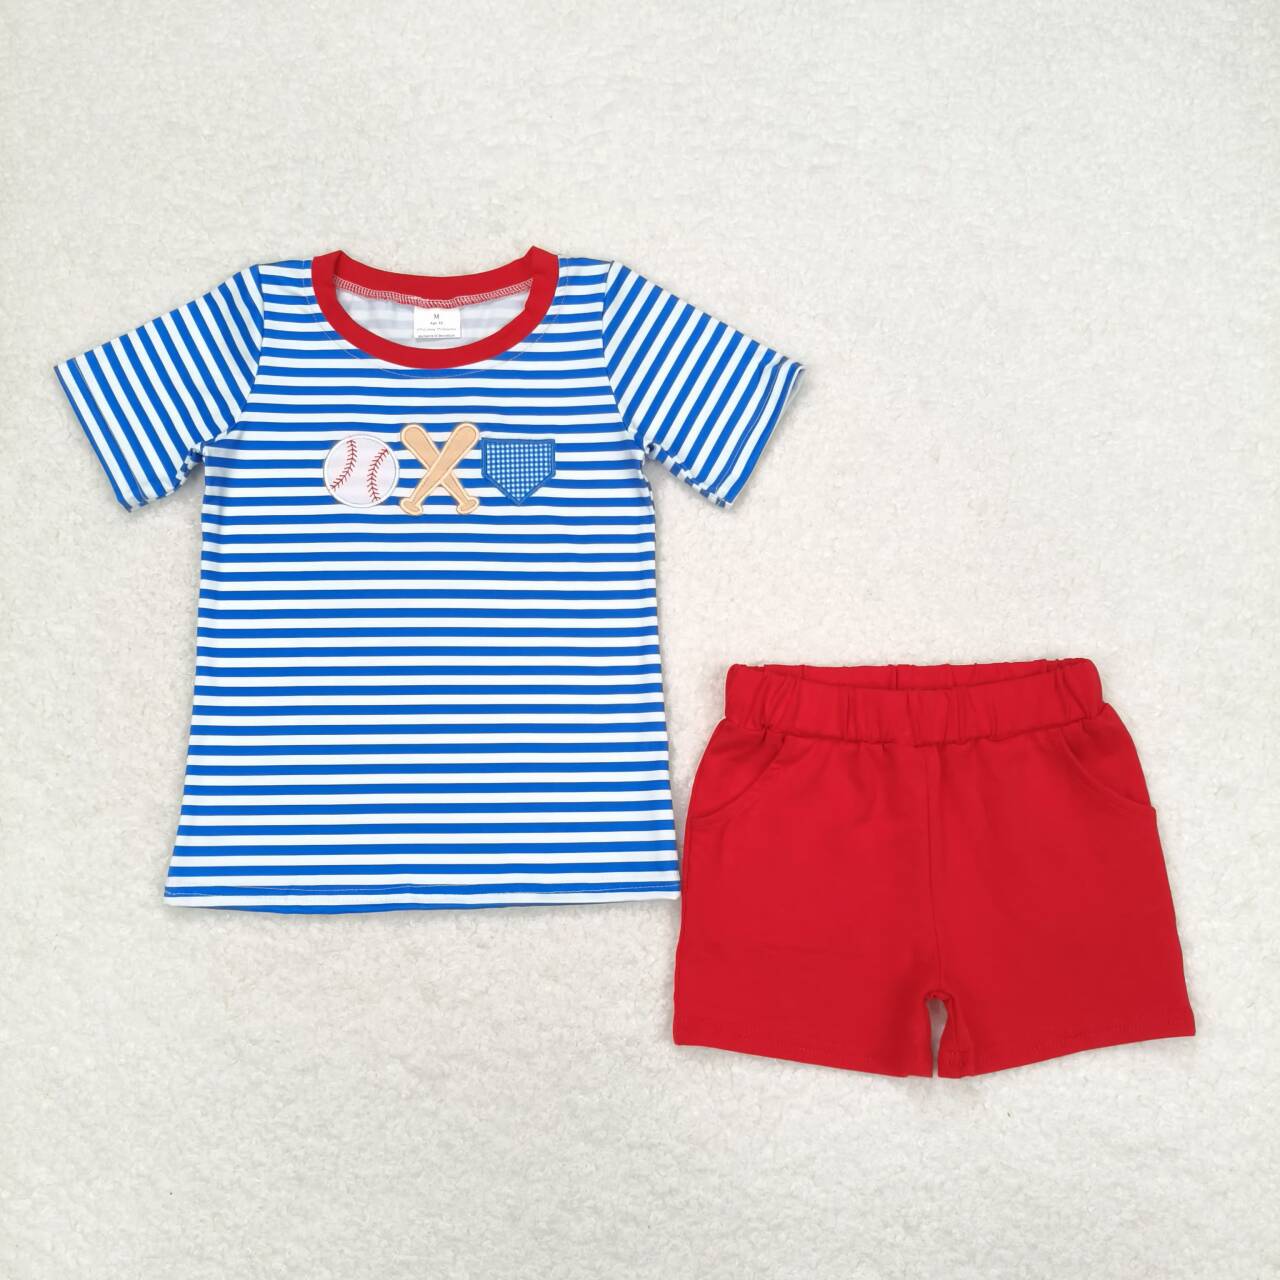 BSSO0844 Baseball Embroidery Print Top Red Shorts Boys Summer Clothes Set